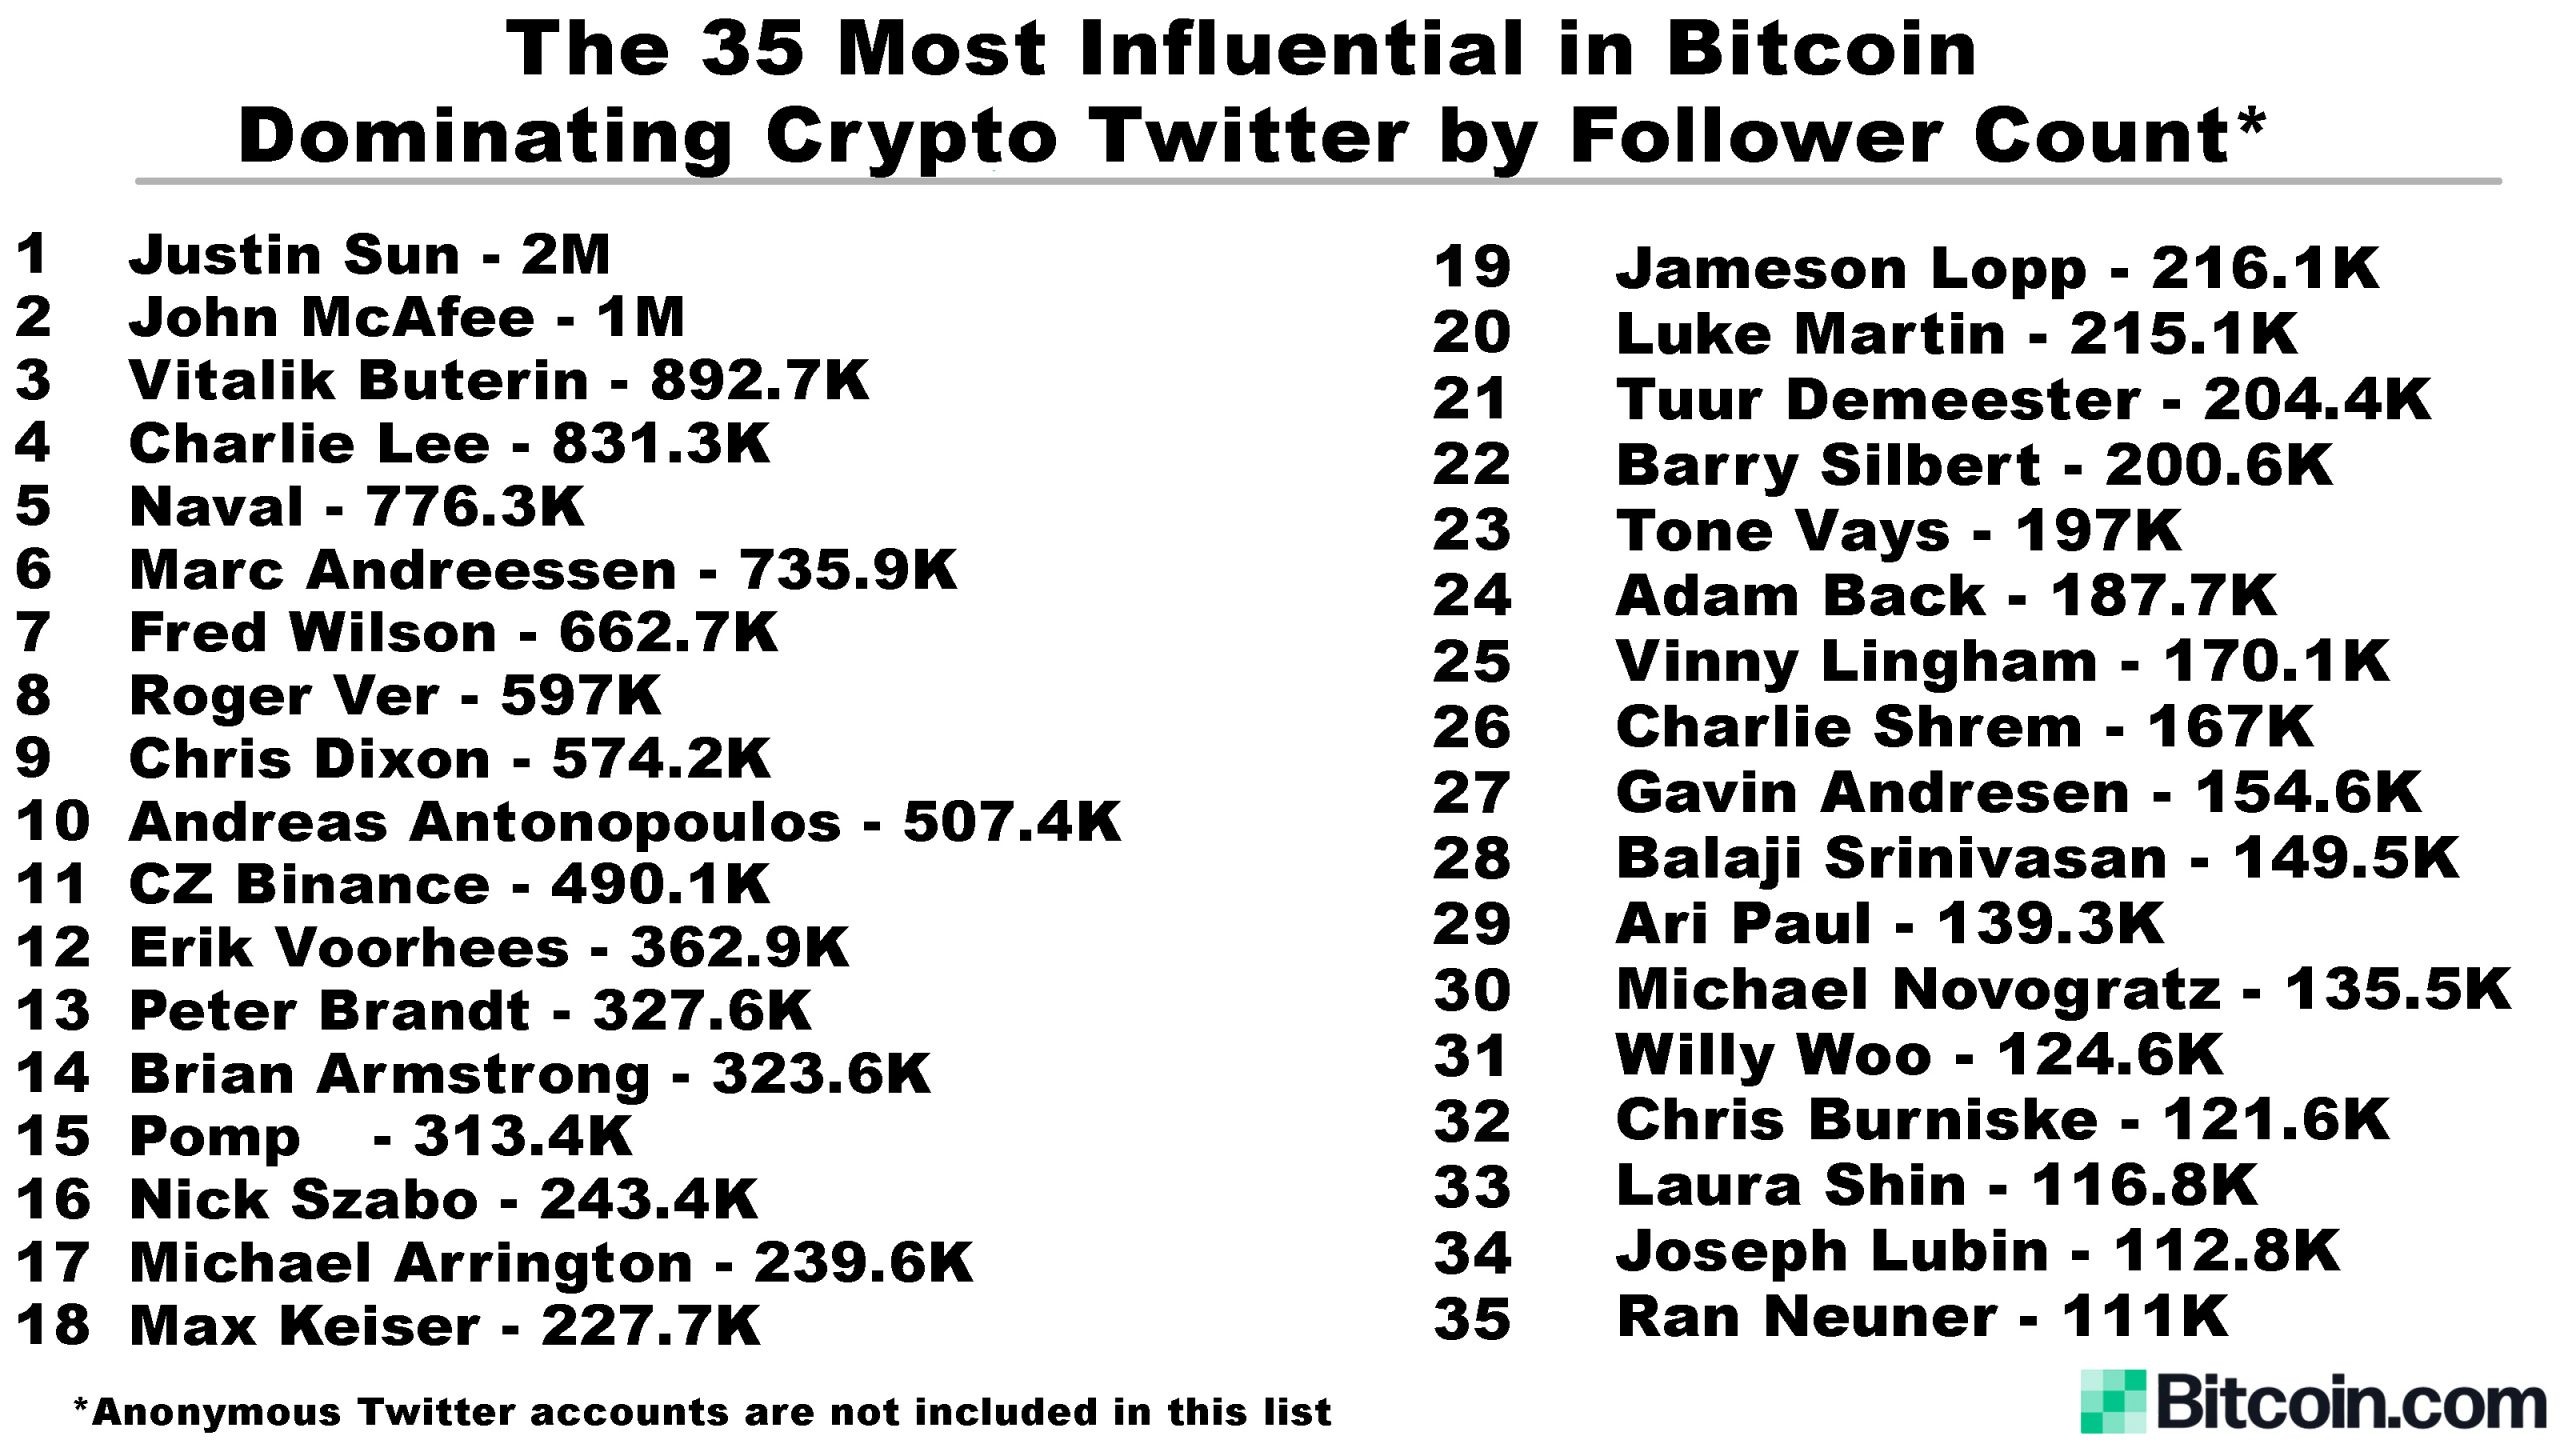 The 35 Most Influential People in Bitcoin by Twitter Follower Count